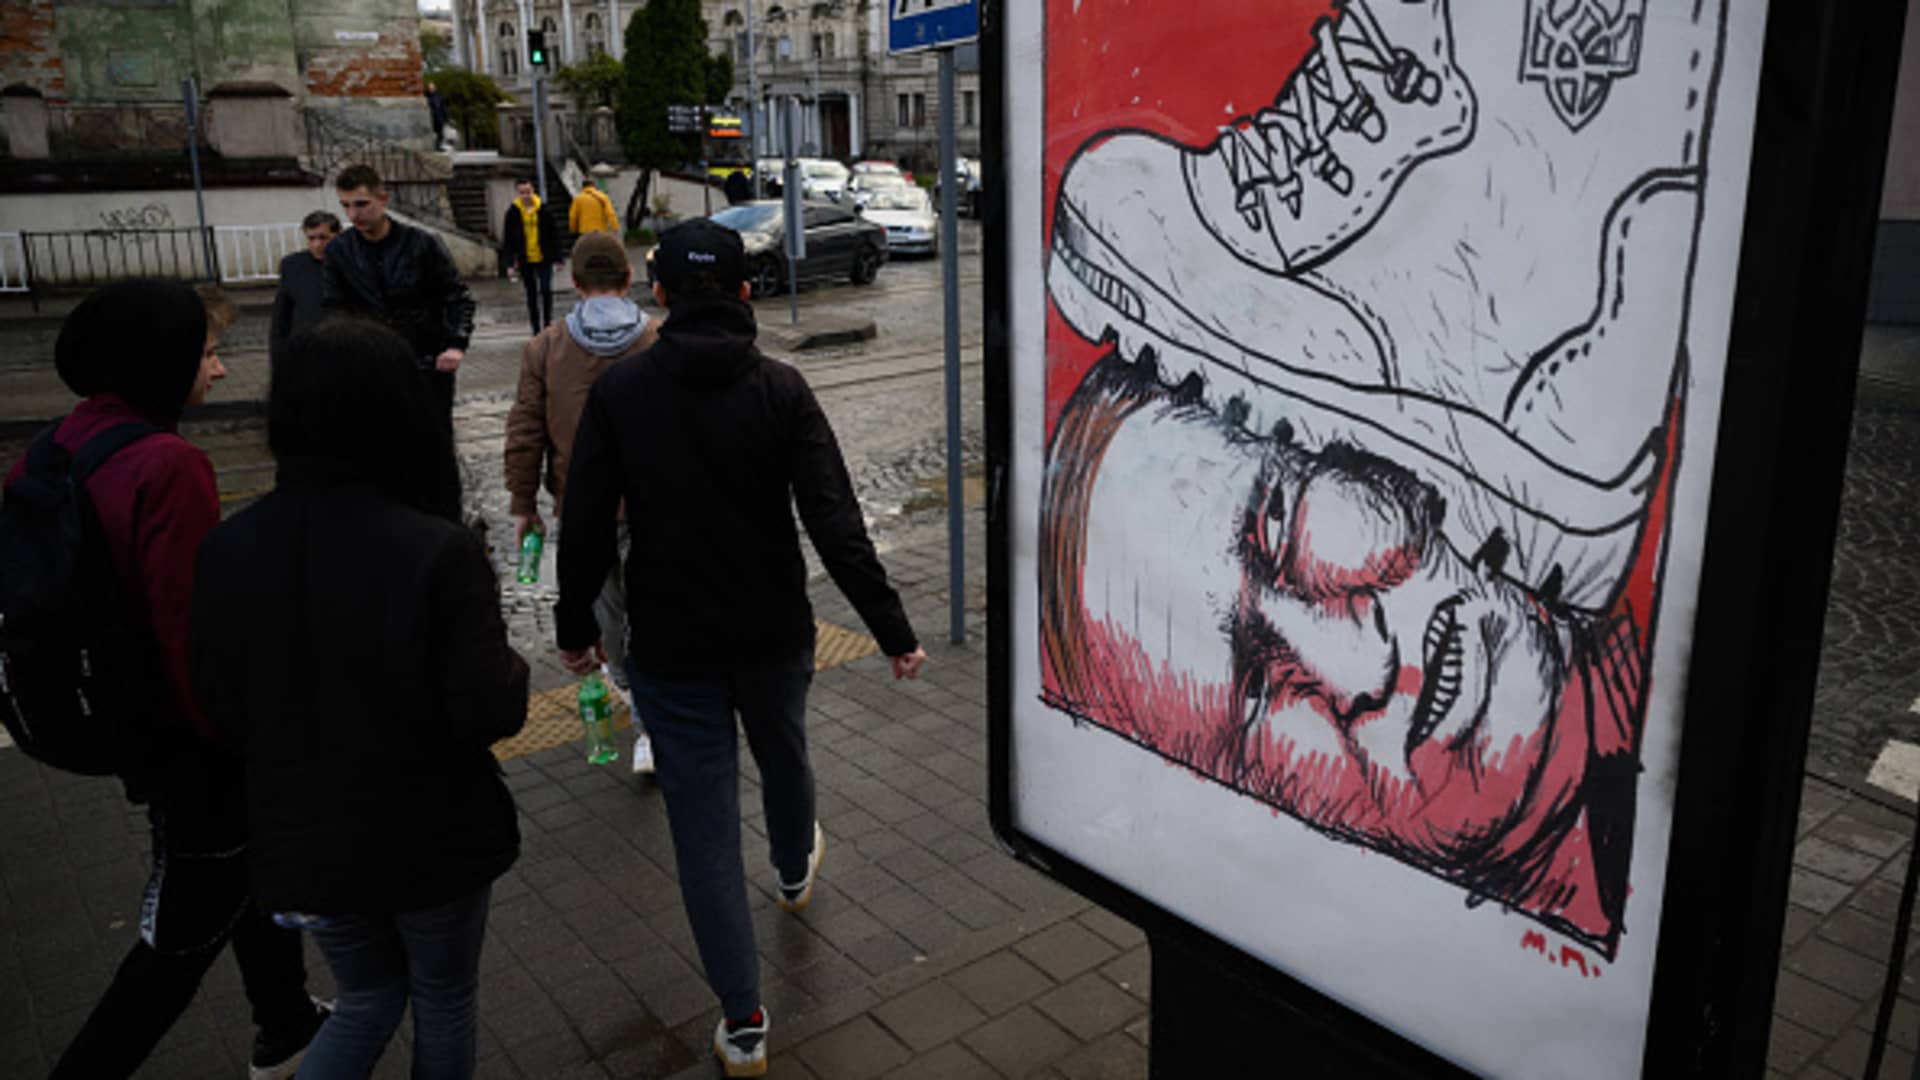 A satirical poster featuring the boot of the Ukrainian army pressing on the head of Russian President Vladimir Putin is seen on April 25, 2022 in Lviv, Ukraine.